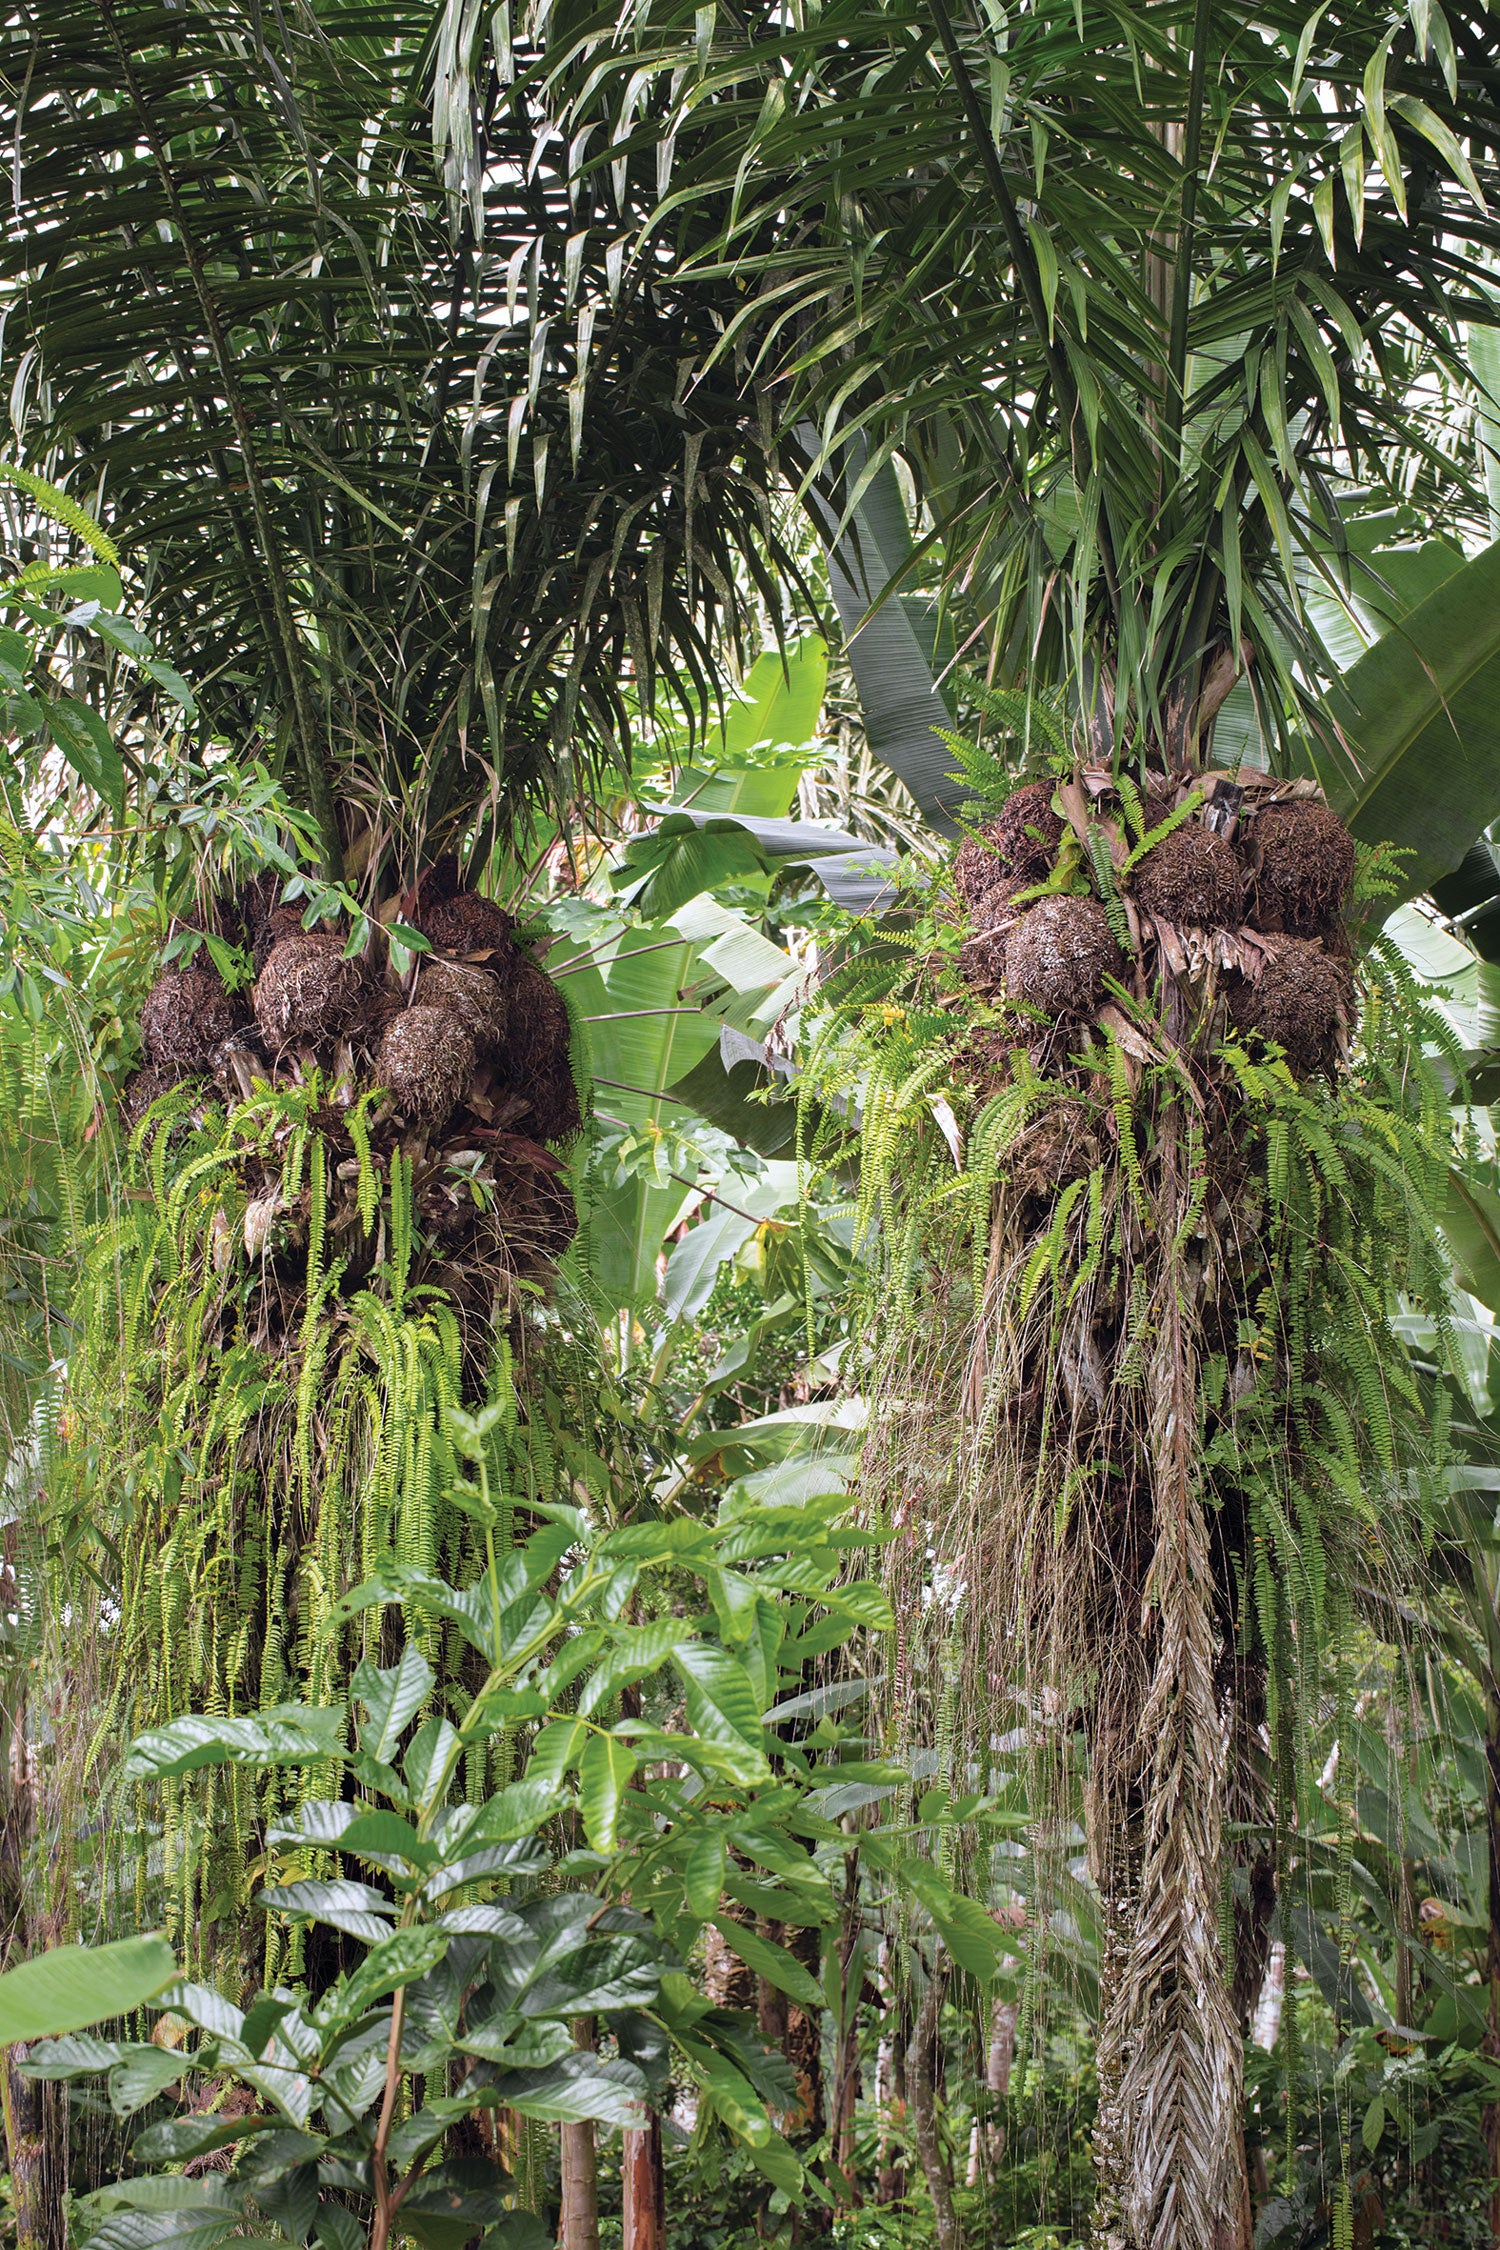 Two female Tagua Palms in the rainforests of Ecuador